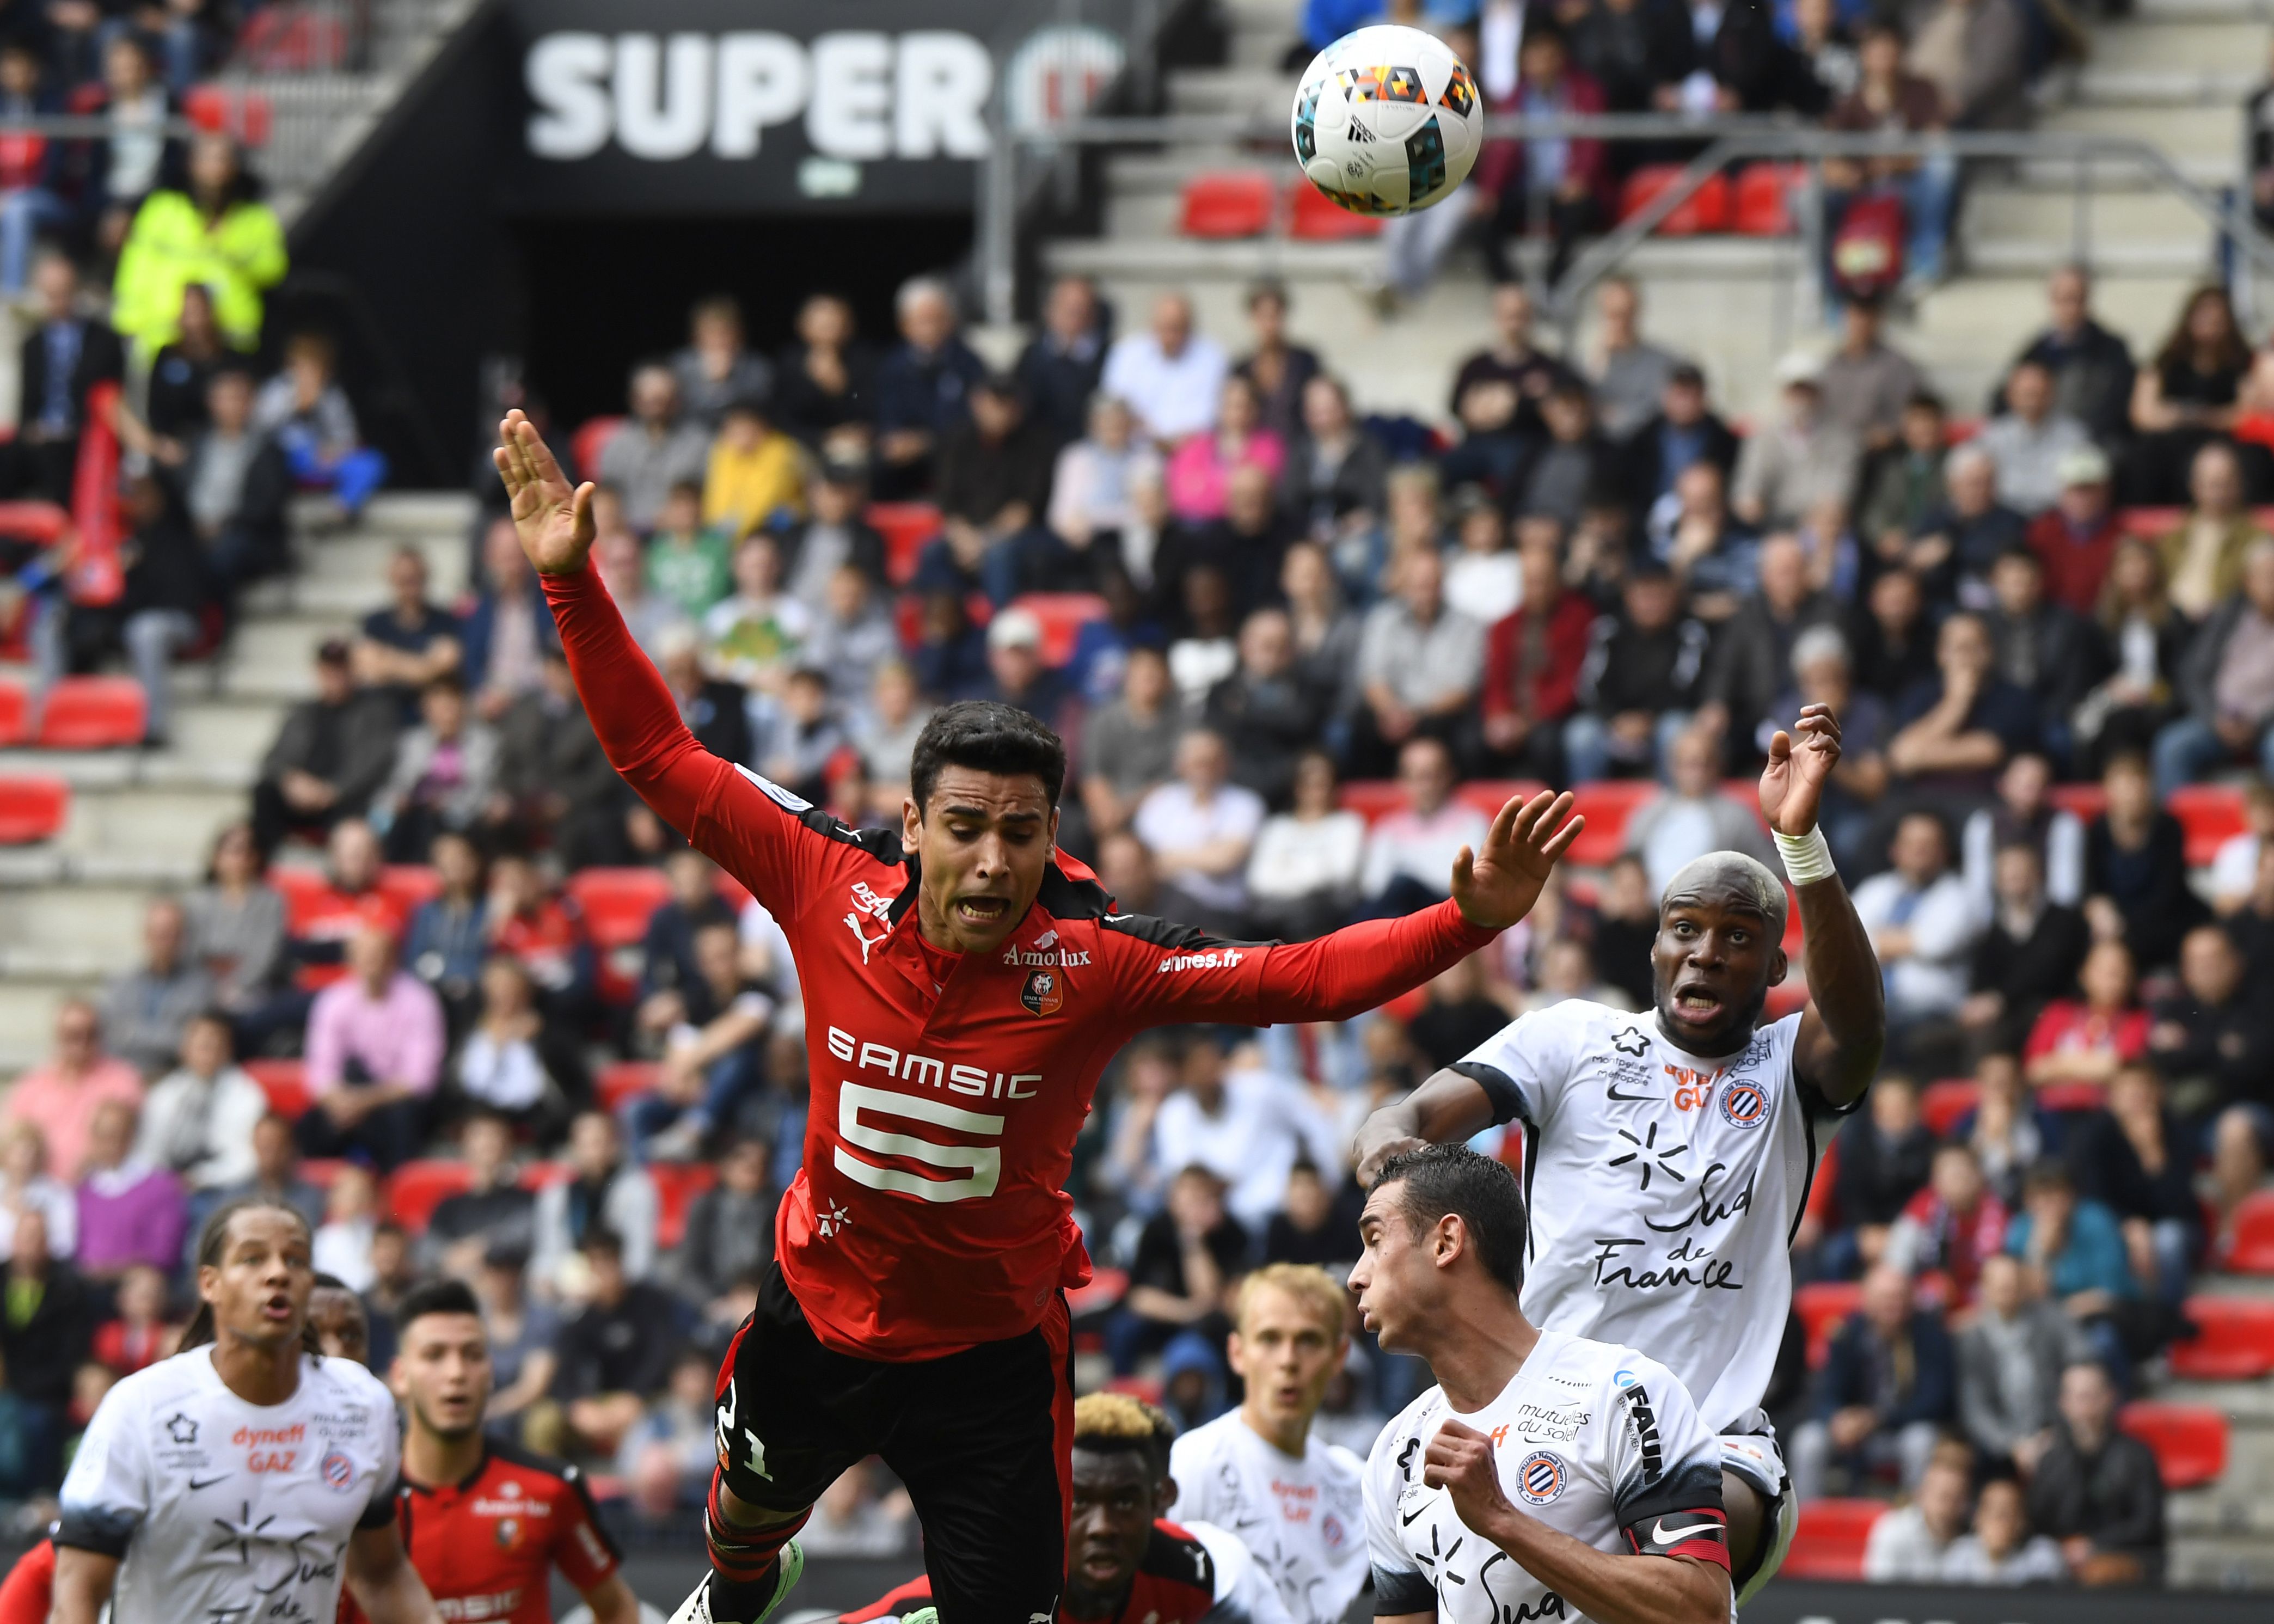 French midfielder Benjamin Andre (C) jumps for the ball during the French L1 football match Rennes versus Montpellier on May 7, 2017 at the Roazhon park stadium in Rennes, western France. / AFP PHOTO / DAMIEN MEYER        (Photo credit should read DAMIEN MEYER/AFP/Getty Images)